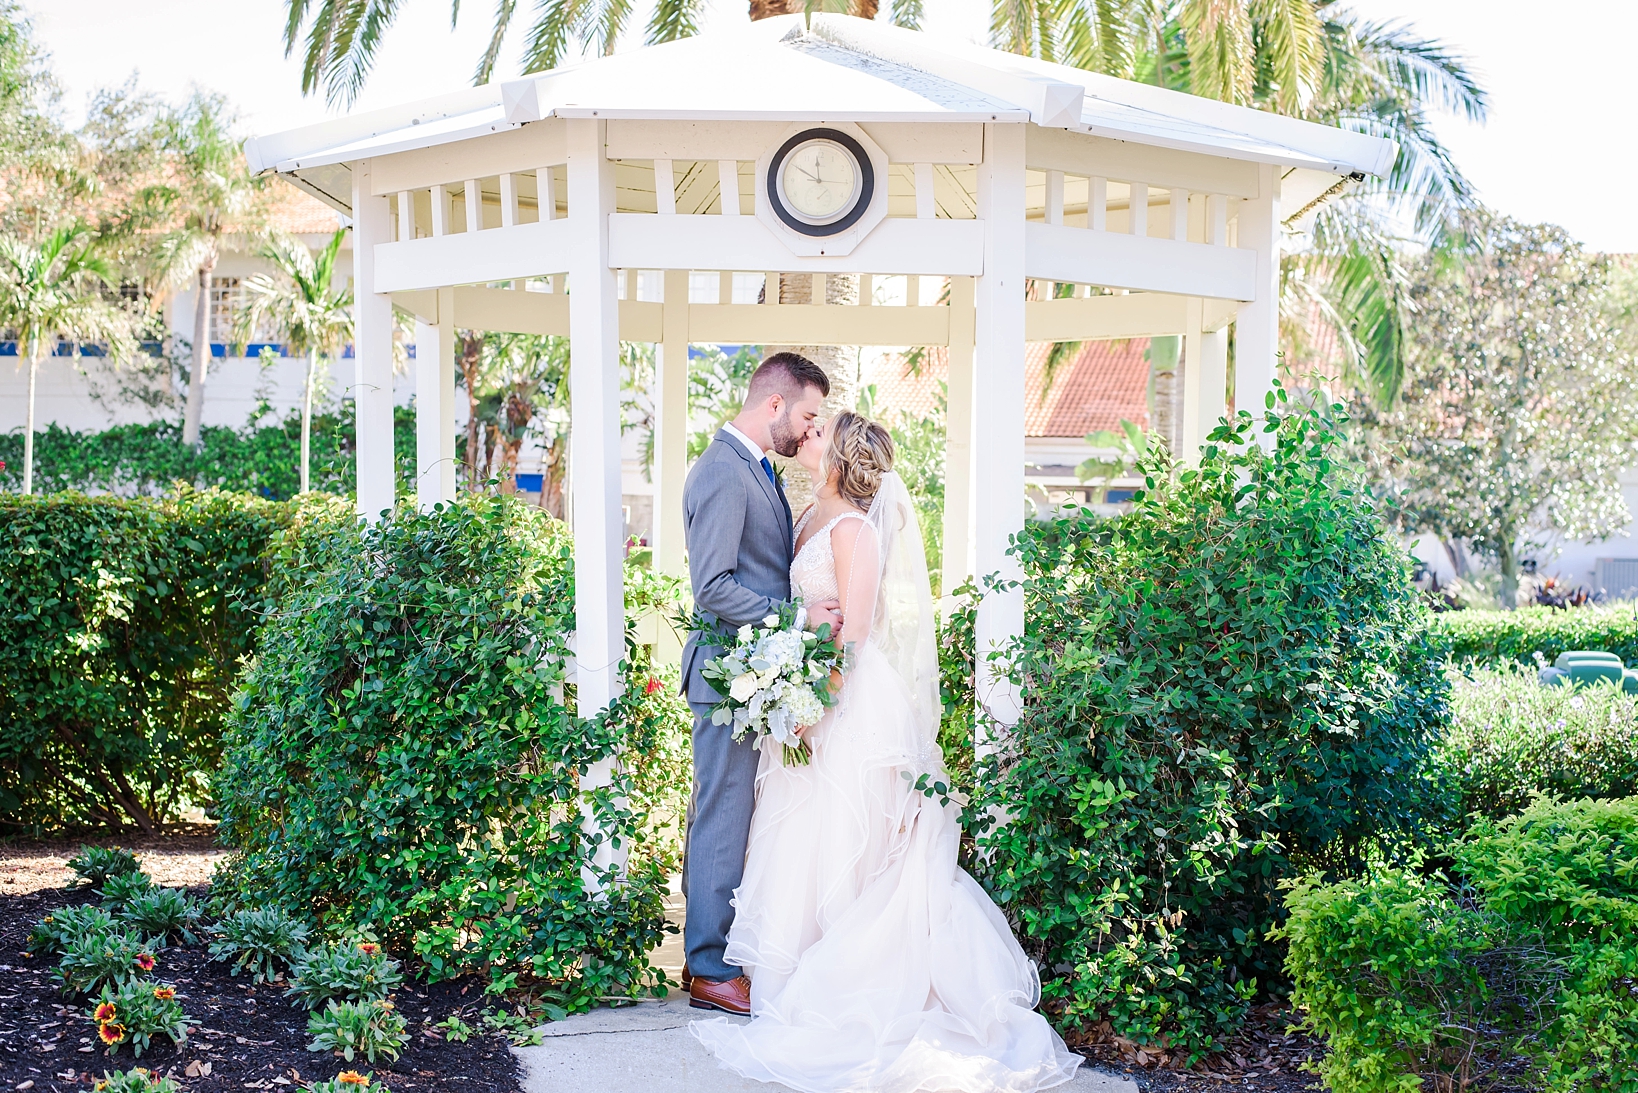 Bride and Groom kiss under a gazebo in St. Pete, FL